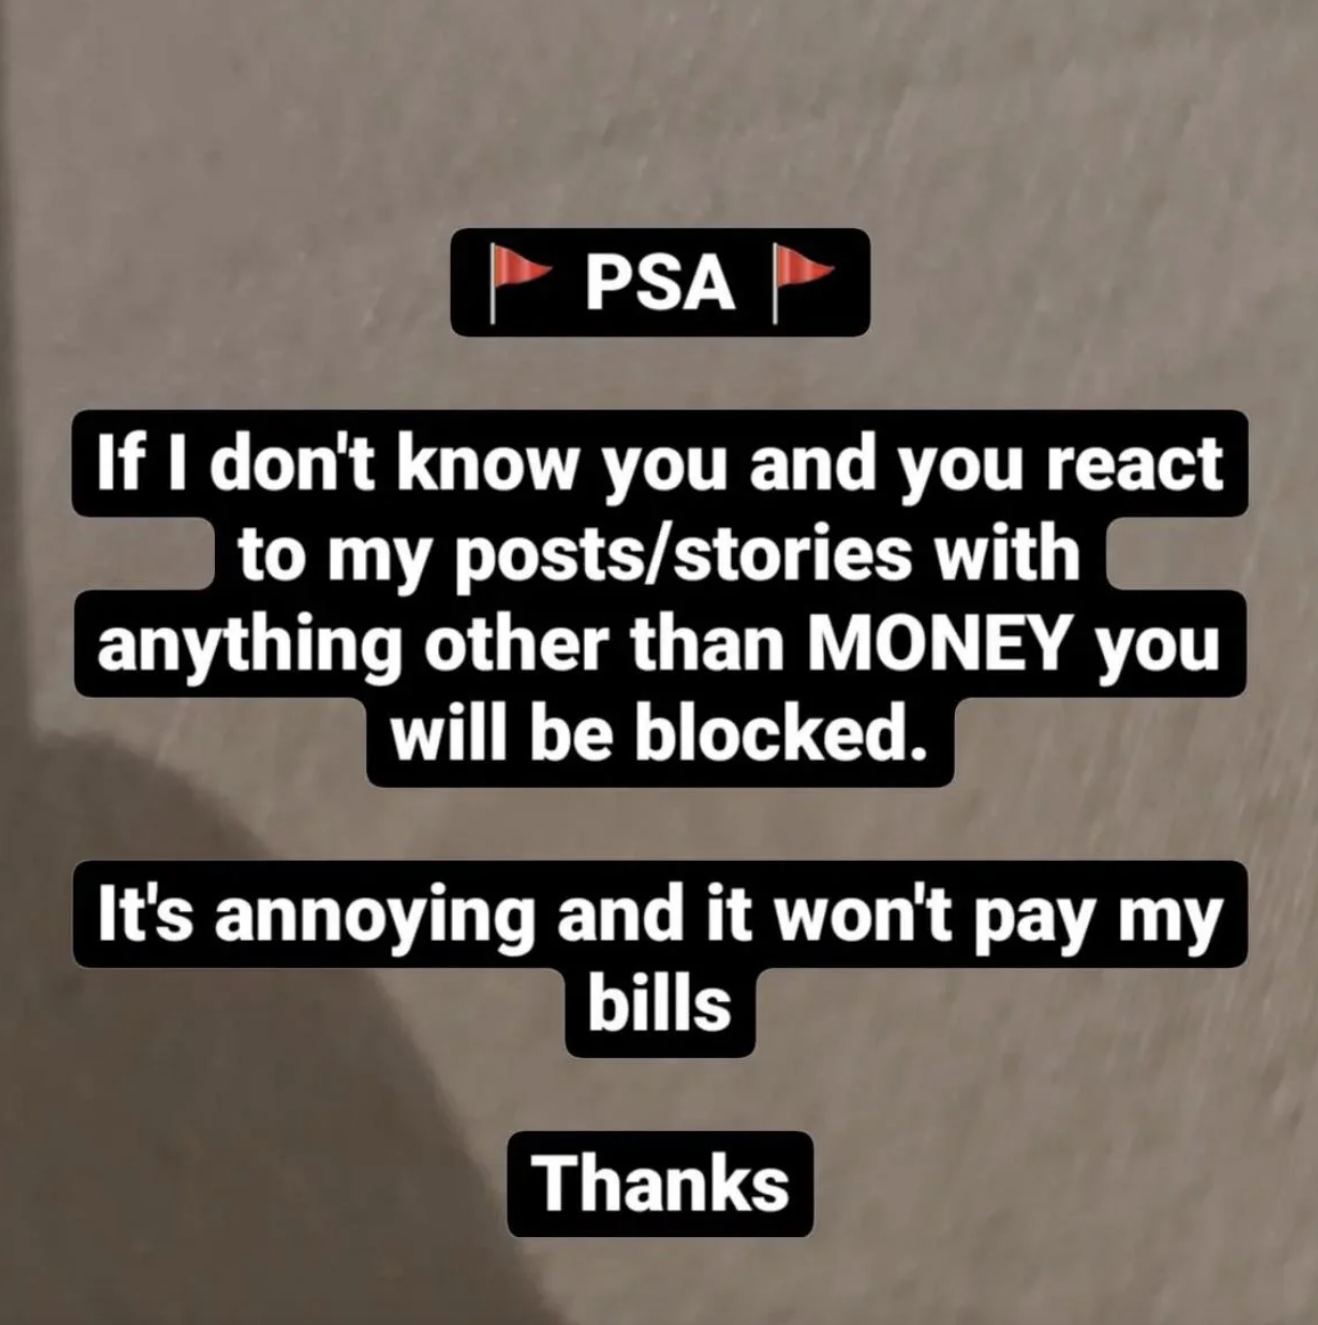 &quot;It&#x27;s annoying and it won&#x27;t pay my bills.&quot;